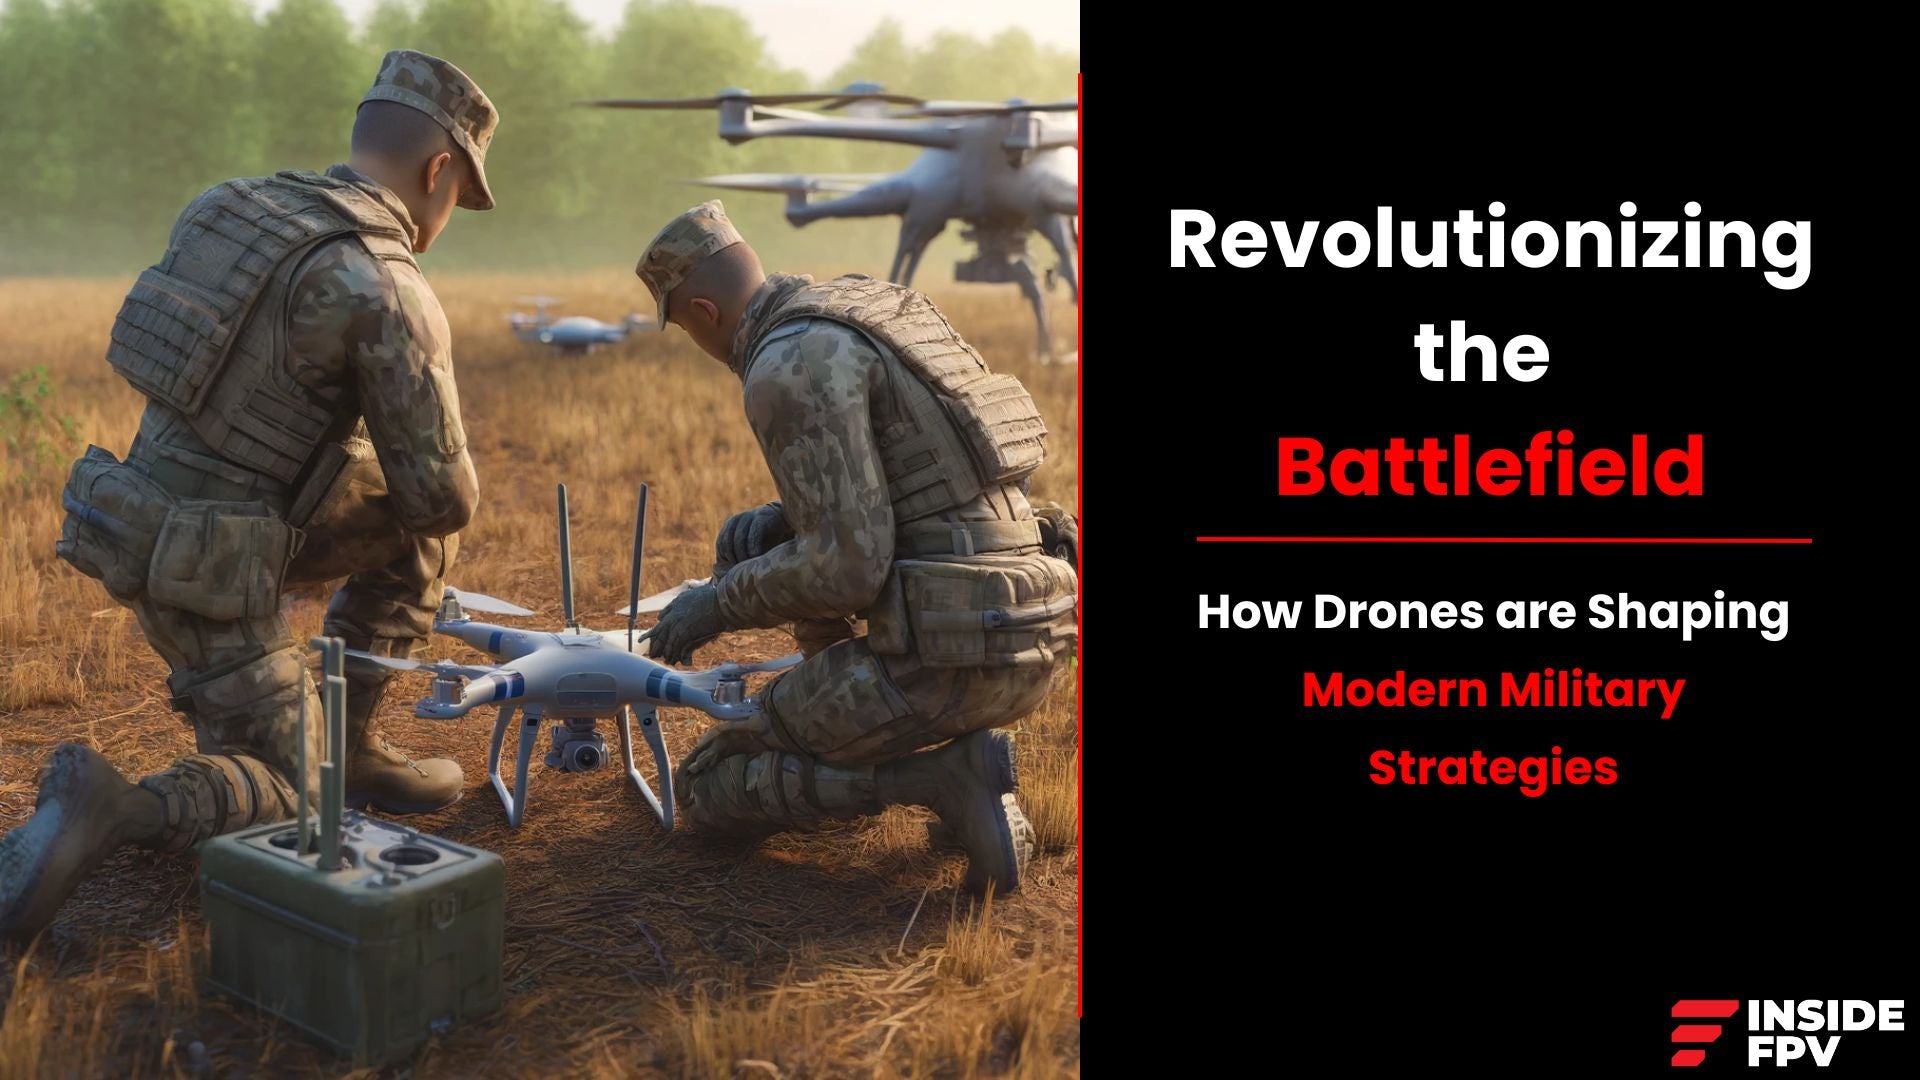 Revolutionizing the Battlefield: How Drones are Shaping Modern Military Strategies